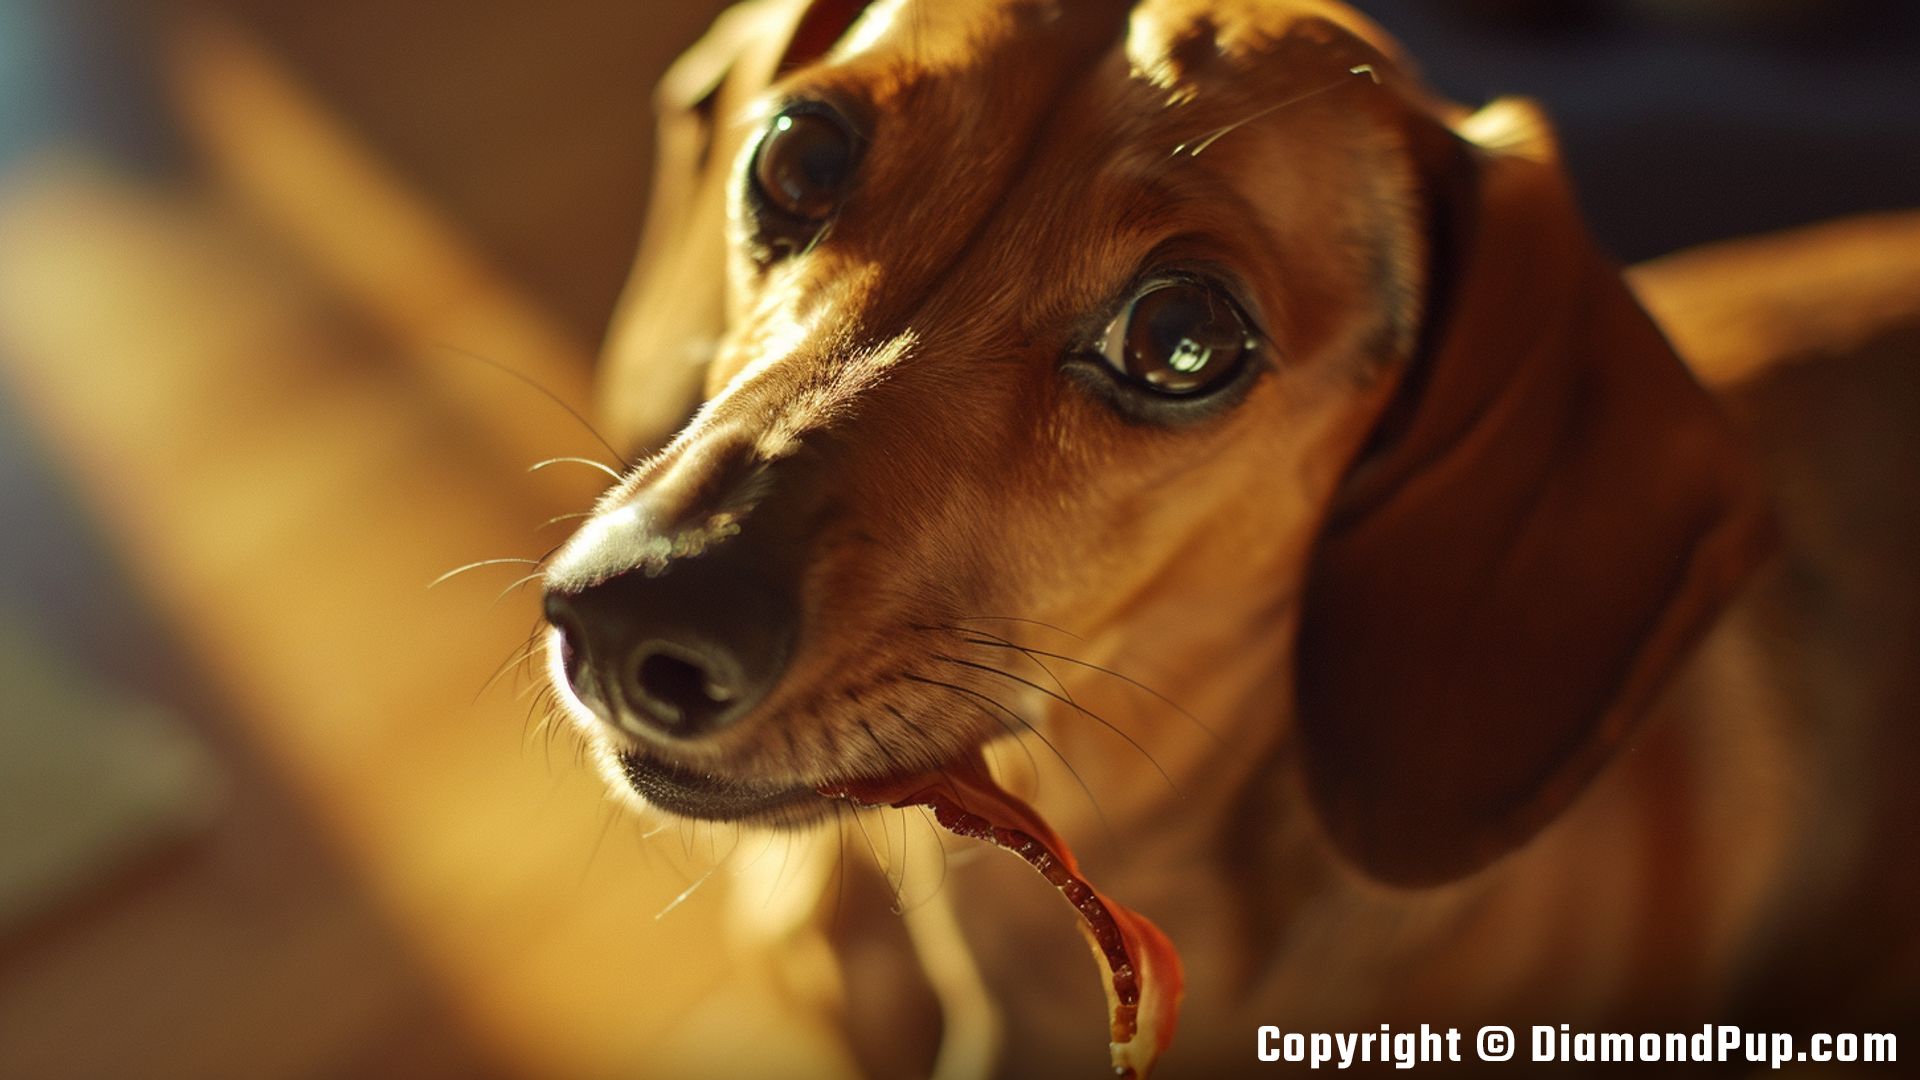 Image of an Adorable Dachshund Eating Bacon